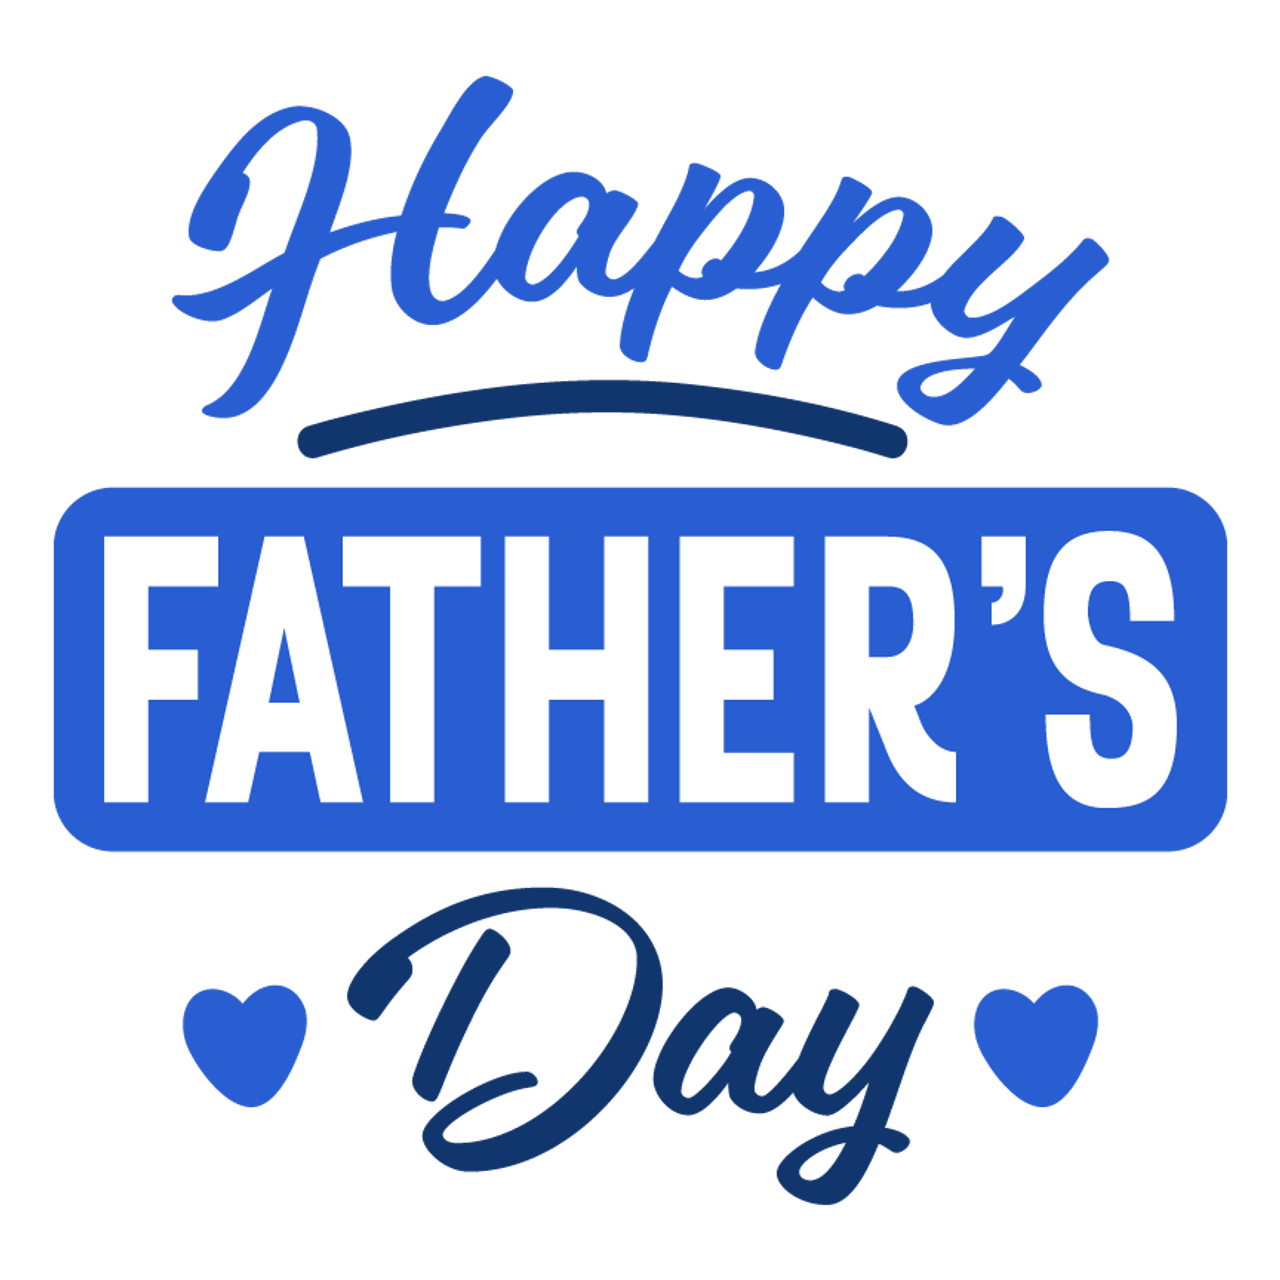 Download Happy Fathers Day SVG v2 - SVG EPS PNG DXF Cut Files for ...